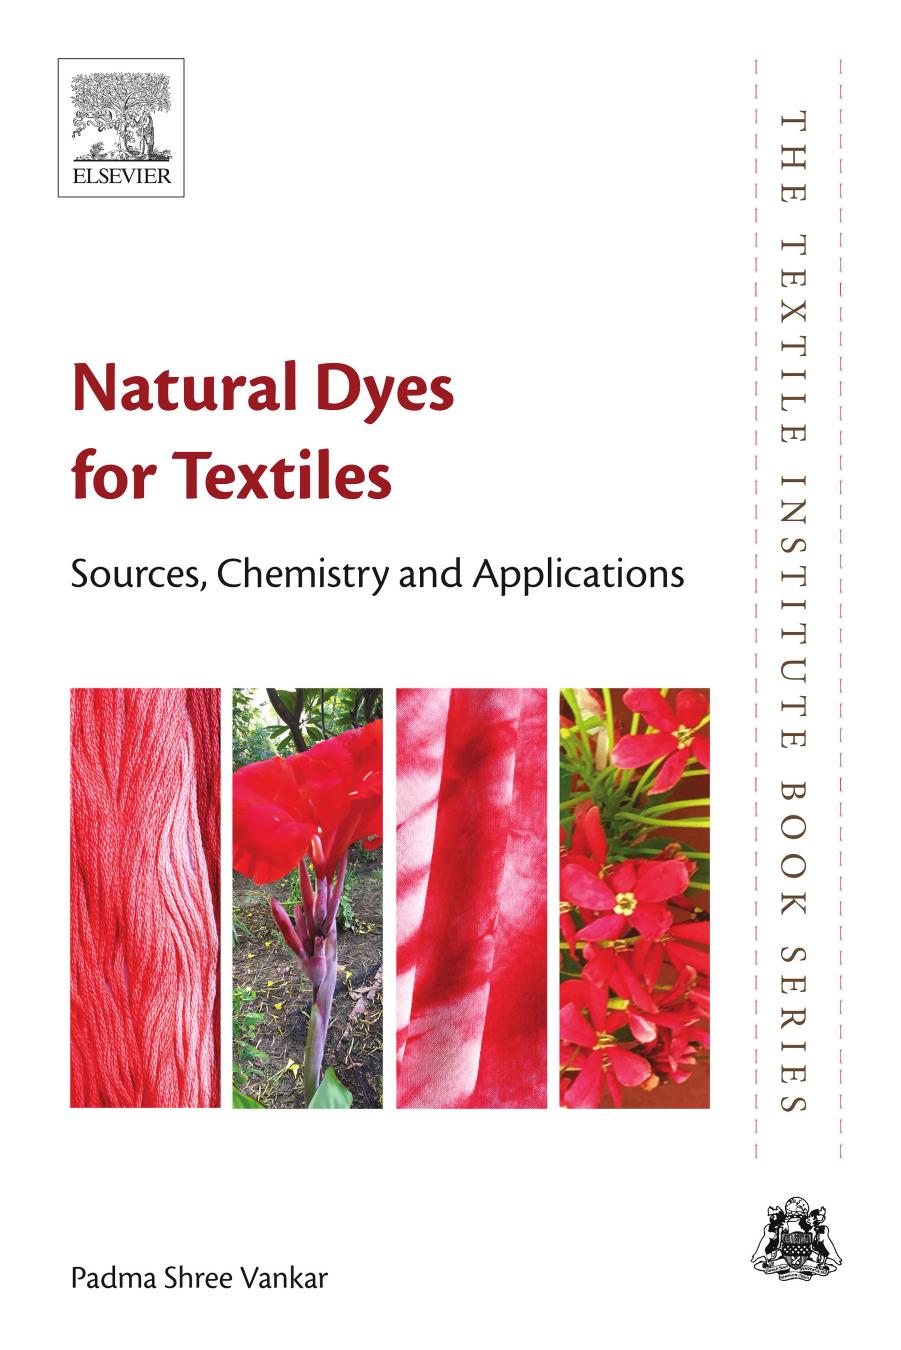 Natural Dyes for Textiles: Sources, Chemistry and Applications